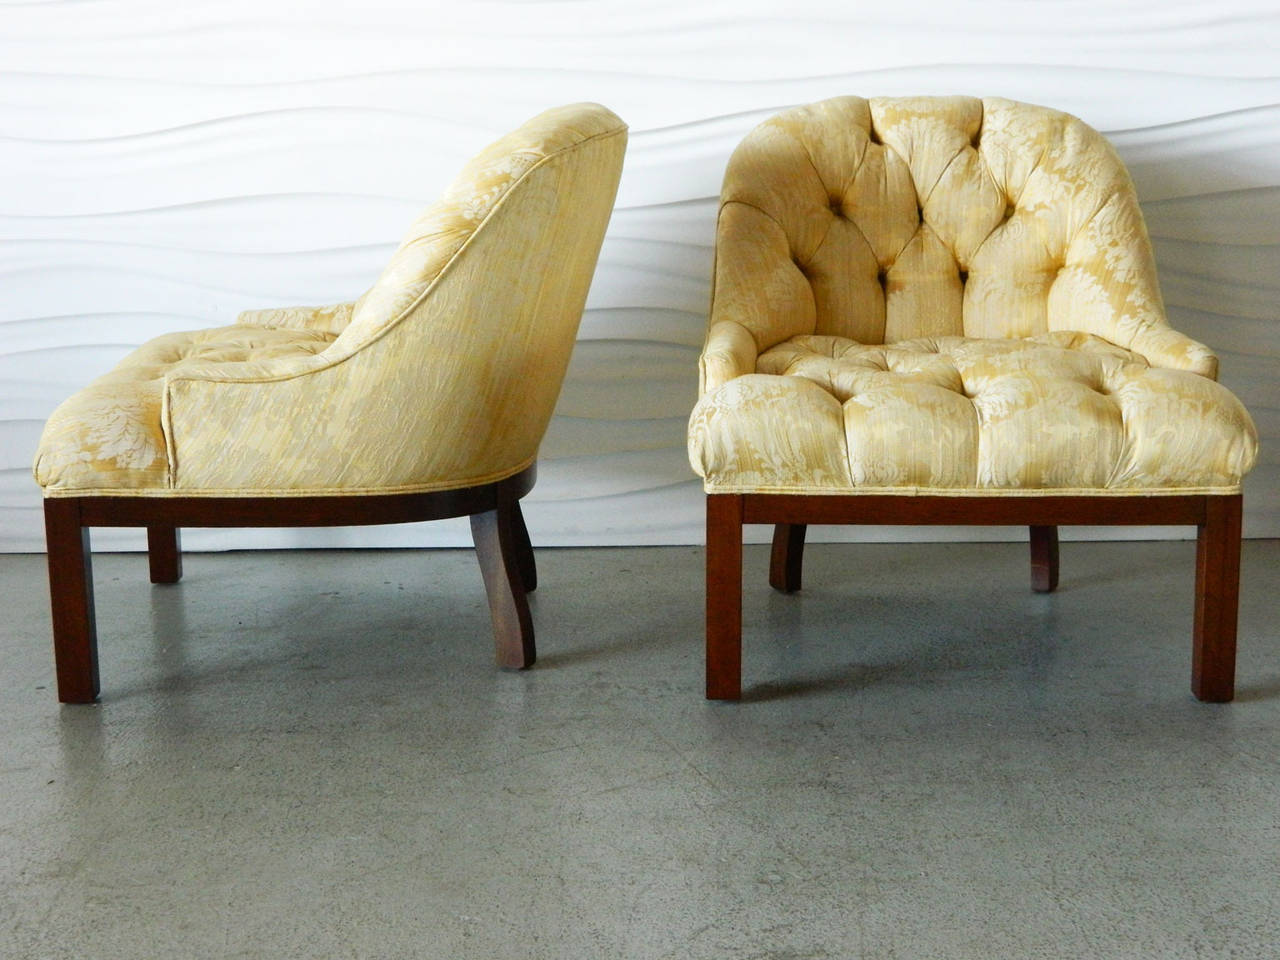 Handsome pair of American modern tufted slipper chairs with low armrests in the style of Edward Wormley.